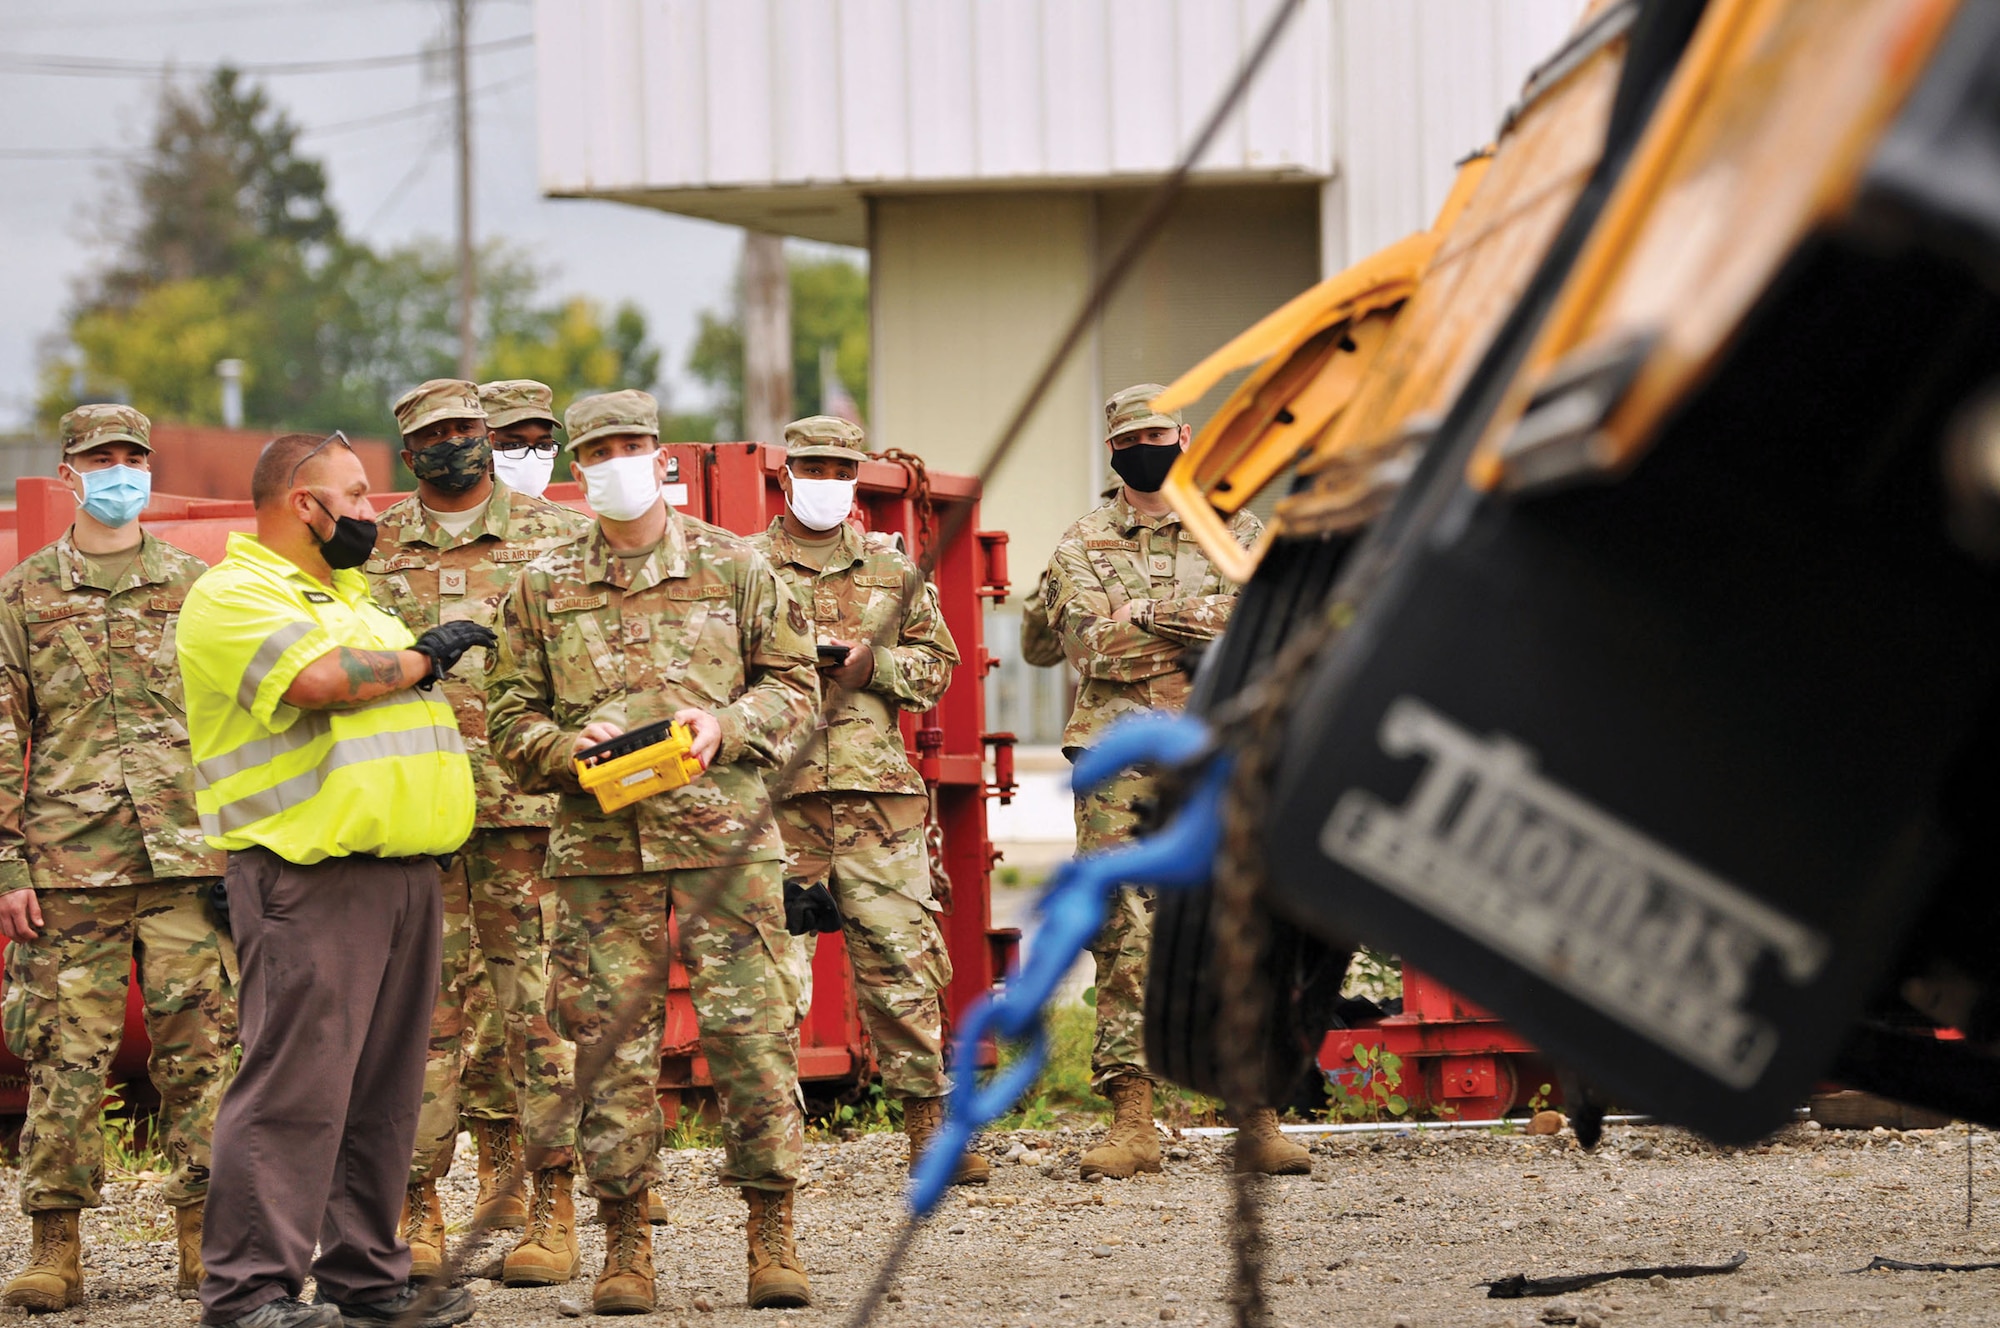 Reserve Citizen Airmen from the 445th Logistics Readiness Squadron perform recovery training on a 44-passenger bus at Sandy’s Towing, Recovery & Carrier Service in Dayton, Ohio, Sept. 13, 2020. Airmen gained hands on training of proper and safe use of wrecker vehicles and recovery procedures.